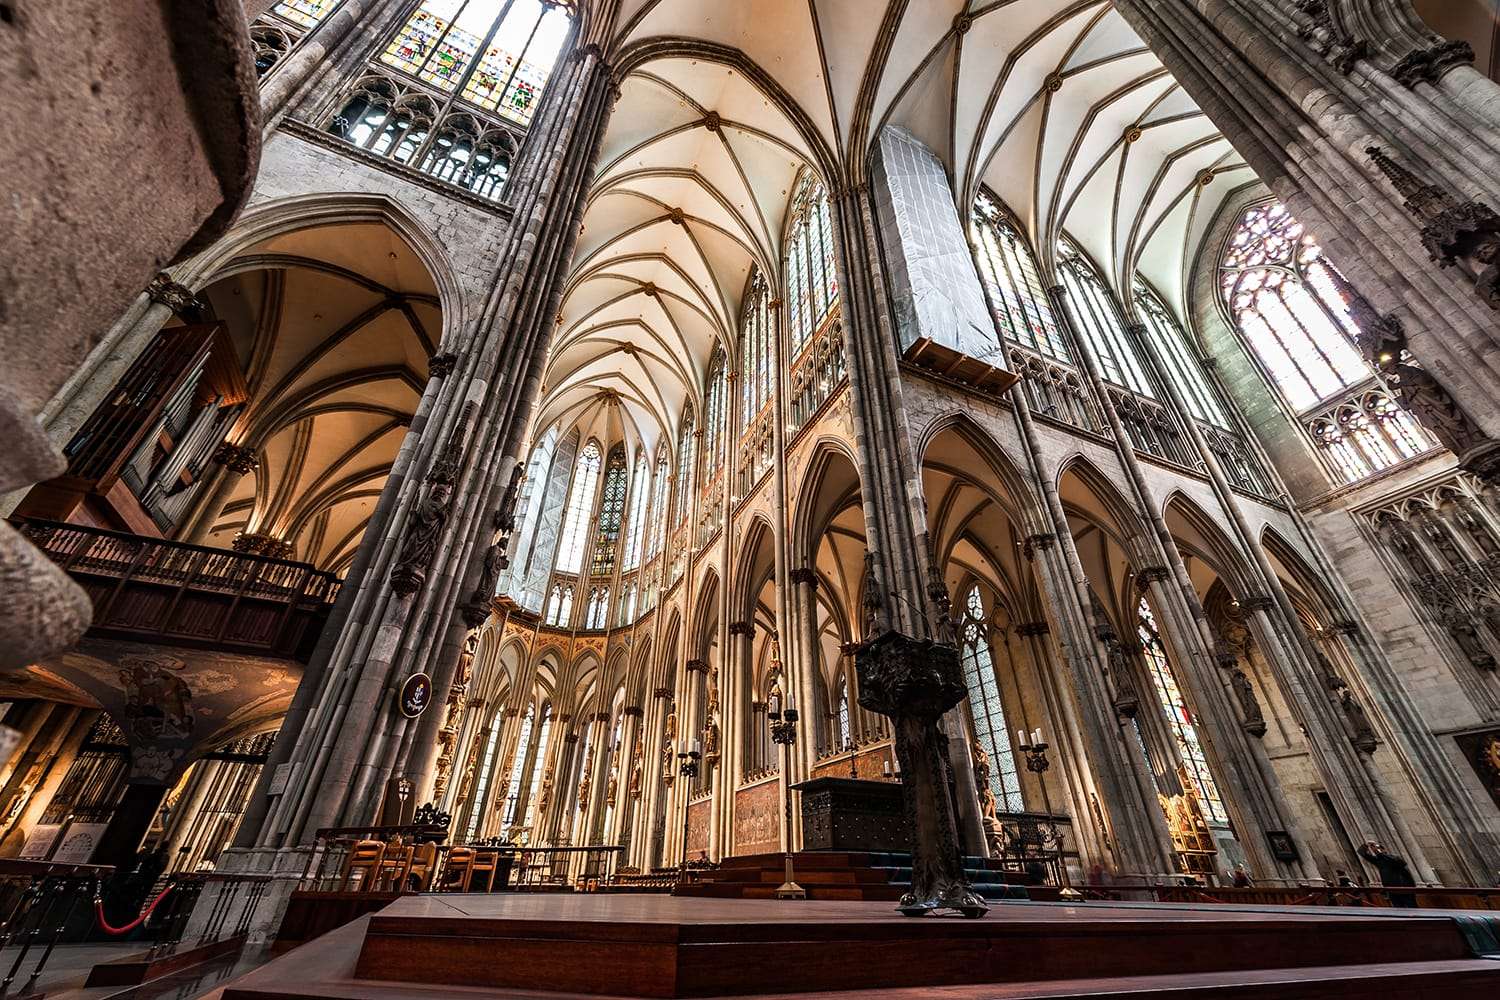 A Great Cathedral puzzle online from photo